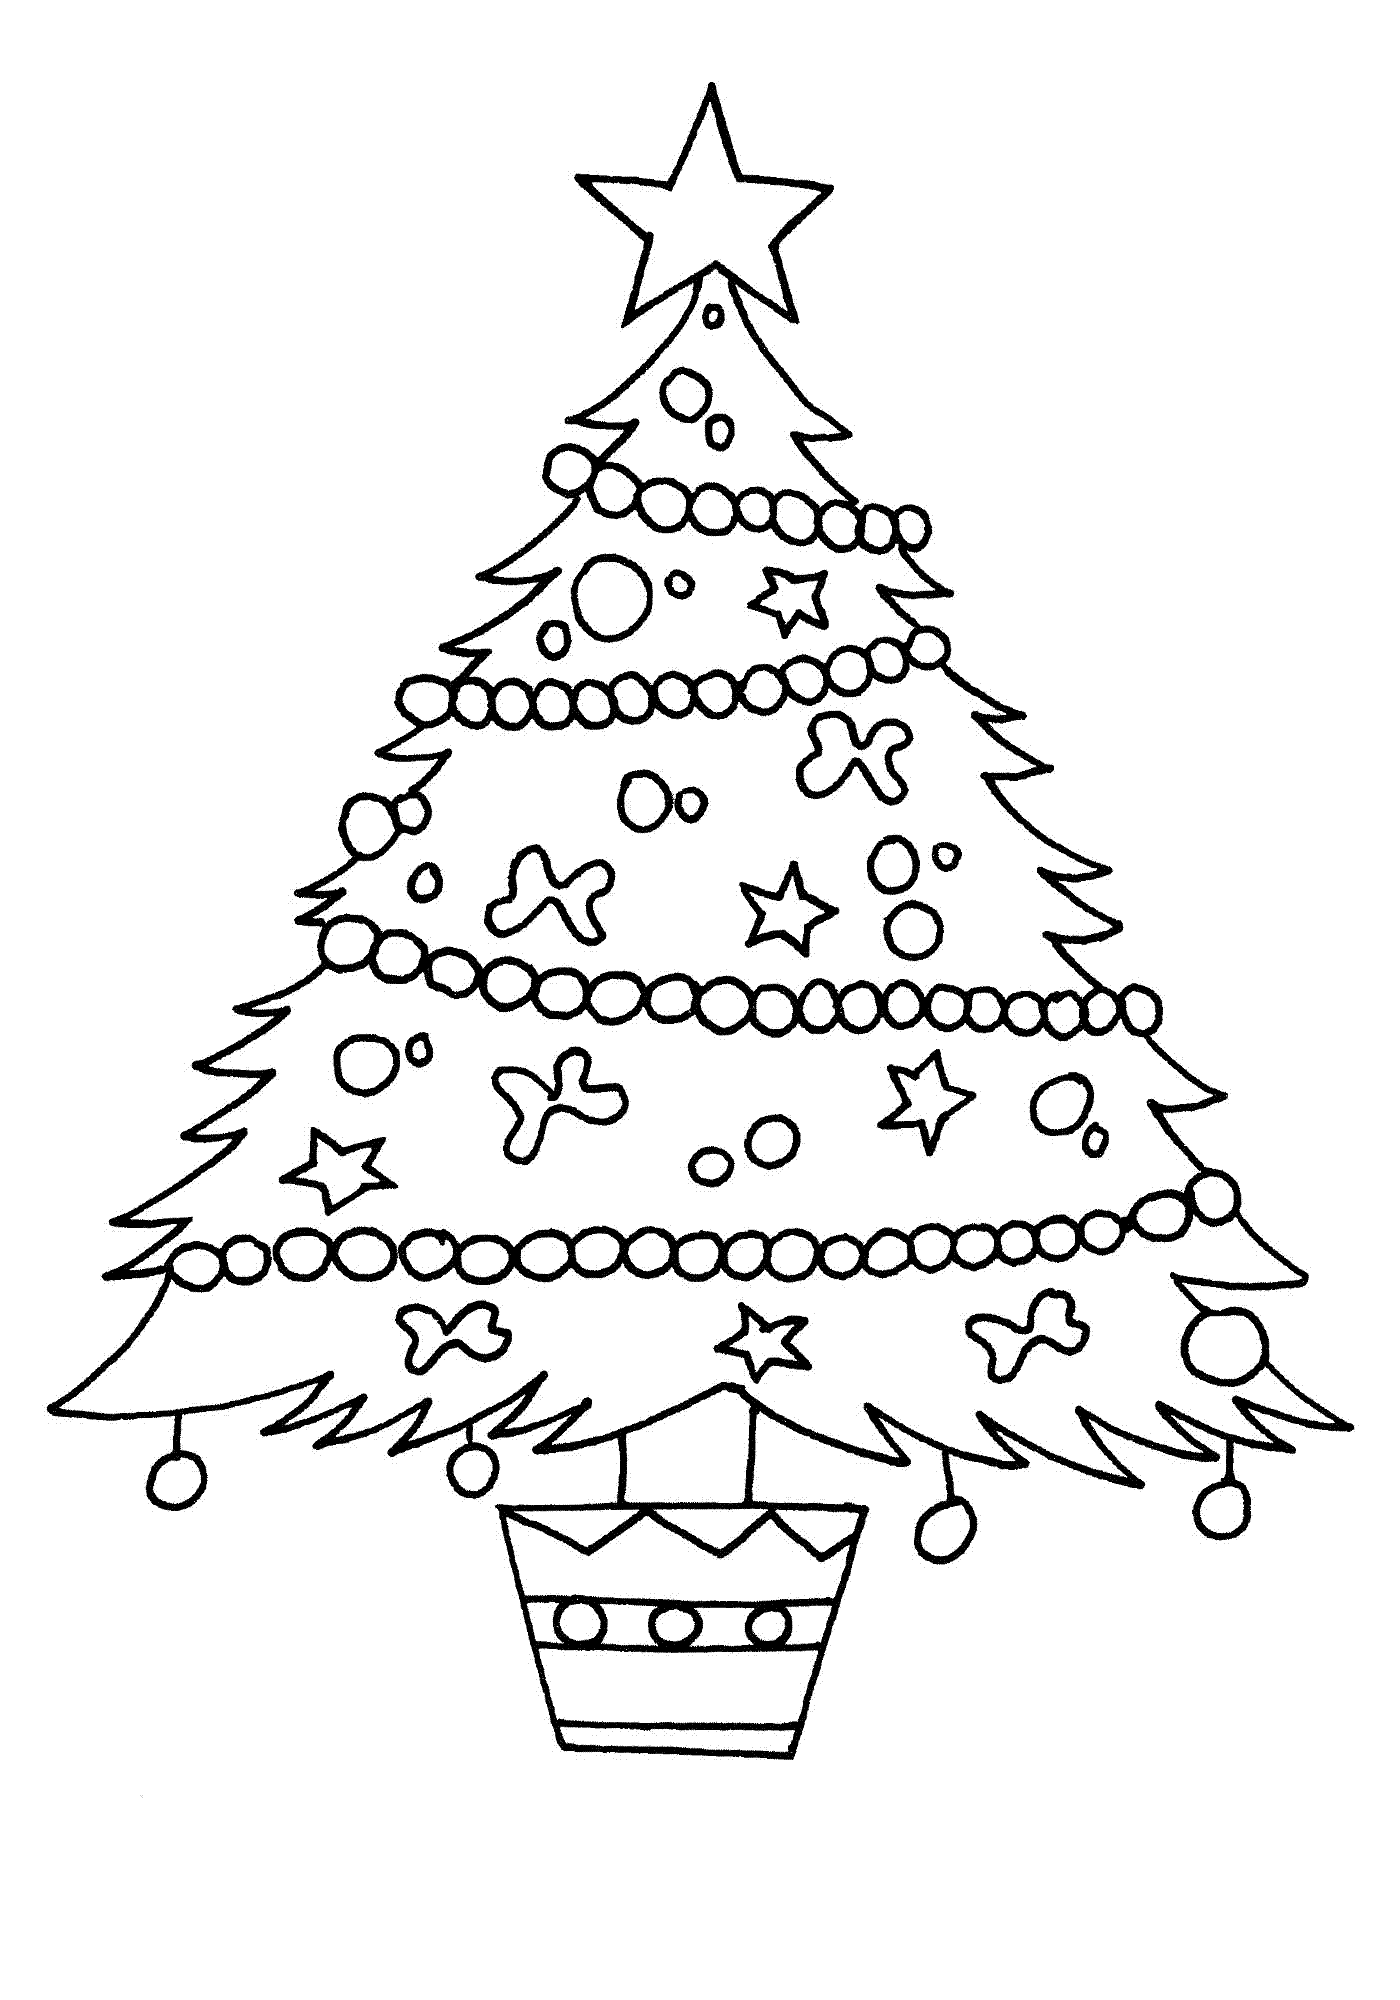 Adorable Christmas Tree Coloring Pages | Christmas Coloring pages ...